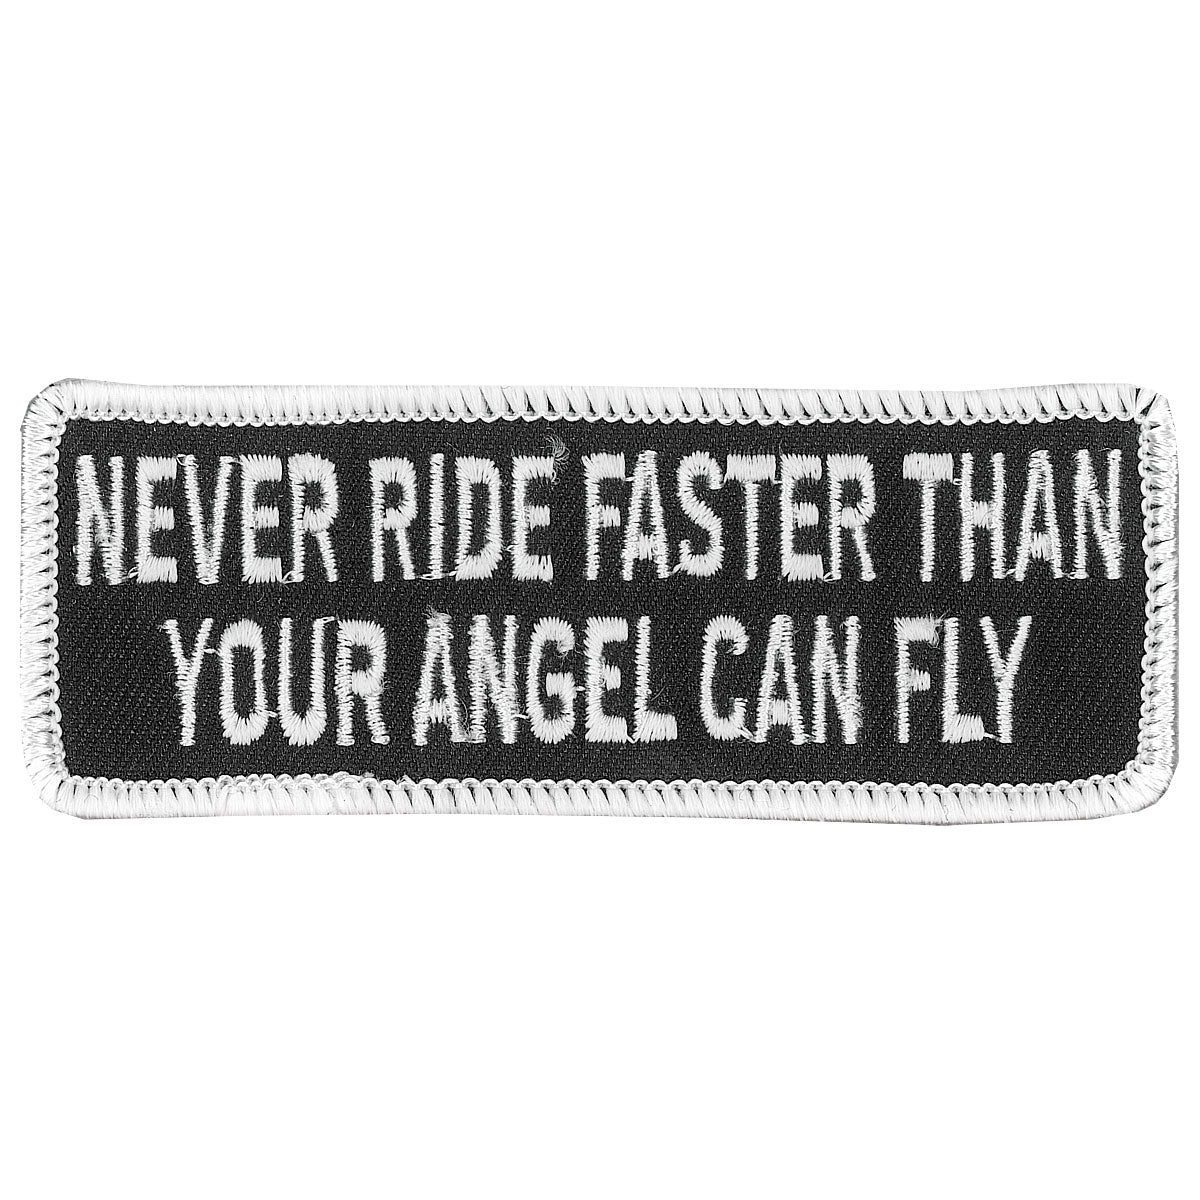 Hot Leathers PPL9114 Never Ride Faster 4" x 2" Patch